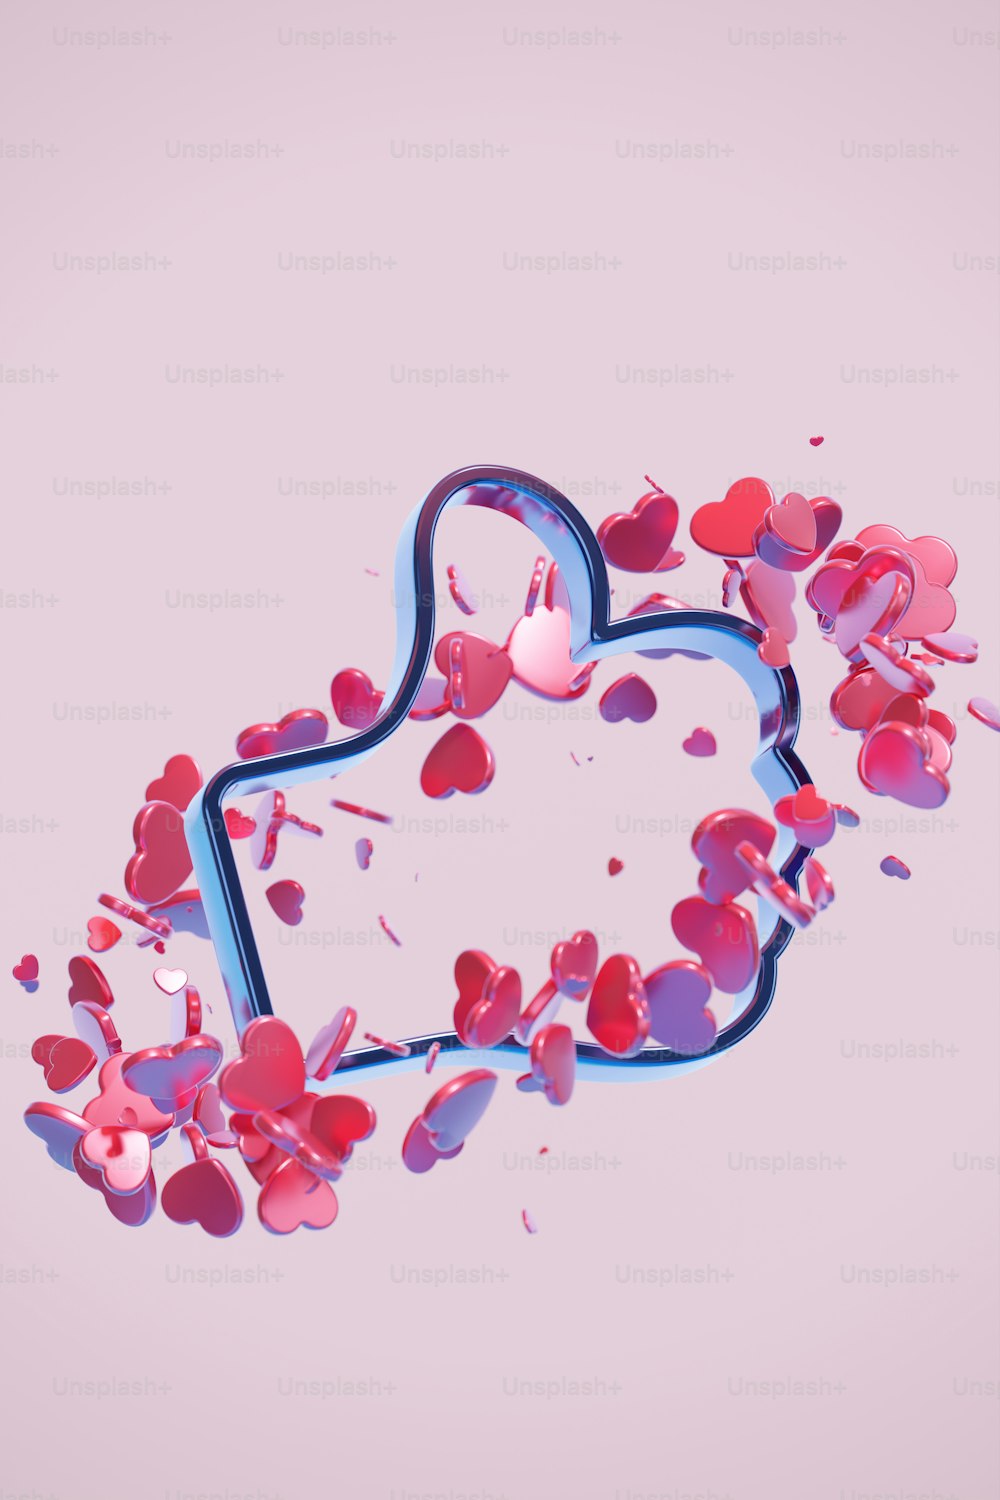 a picture of a heart shaped object on a pink background